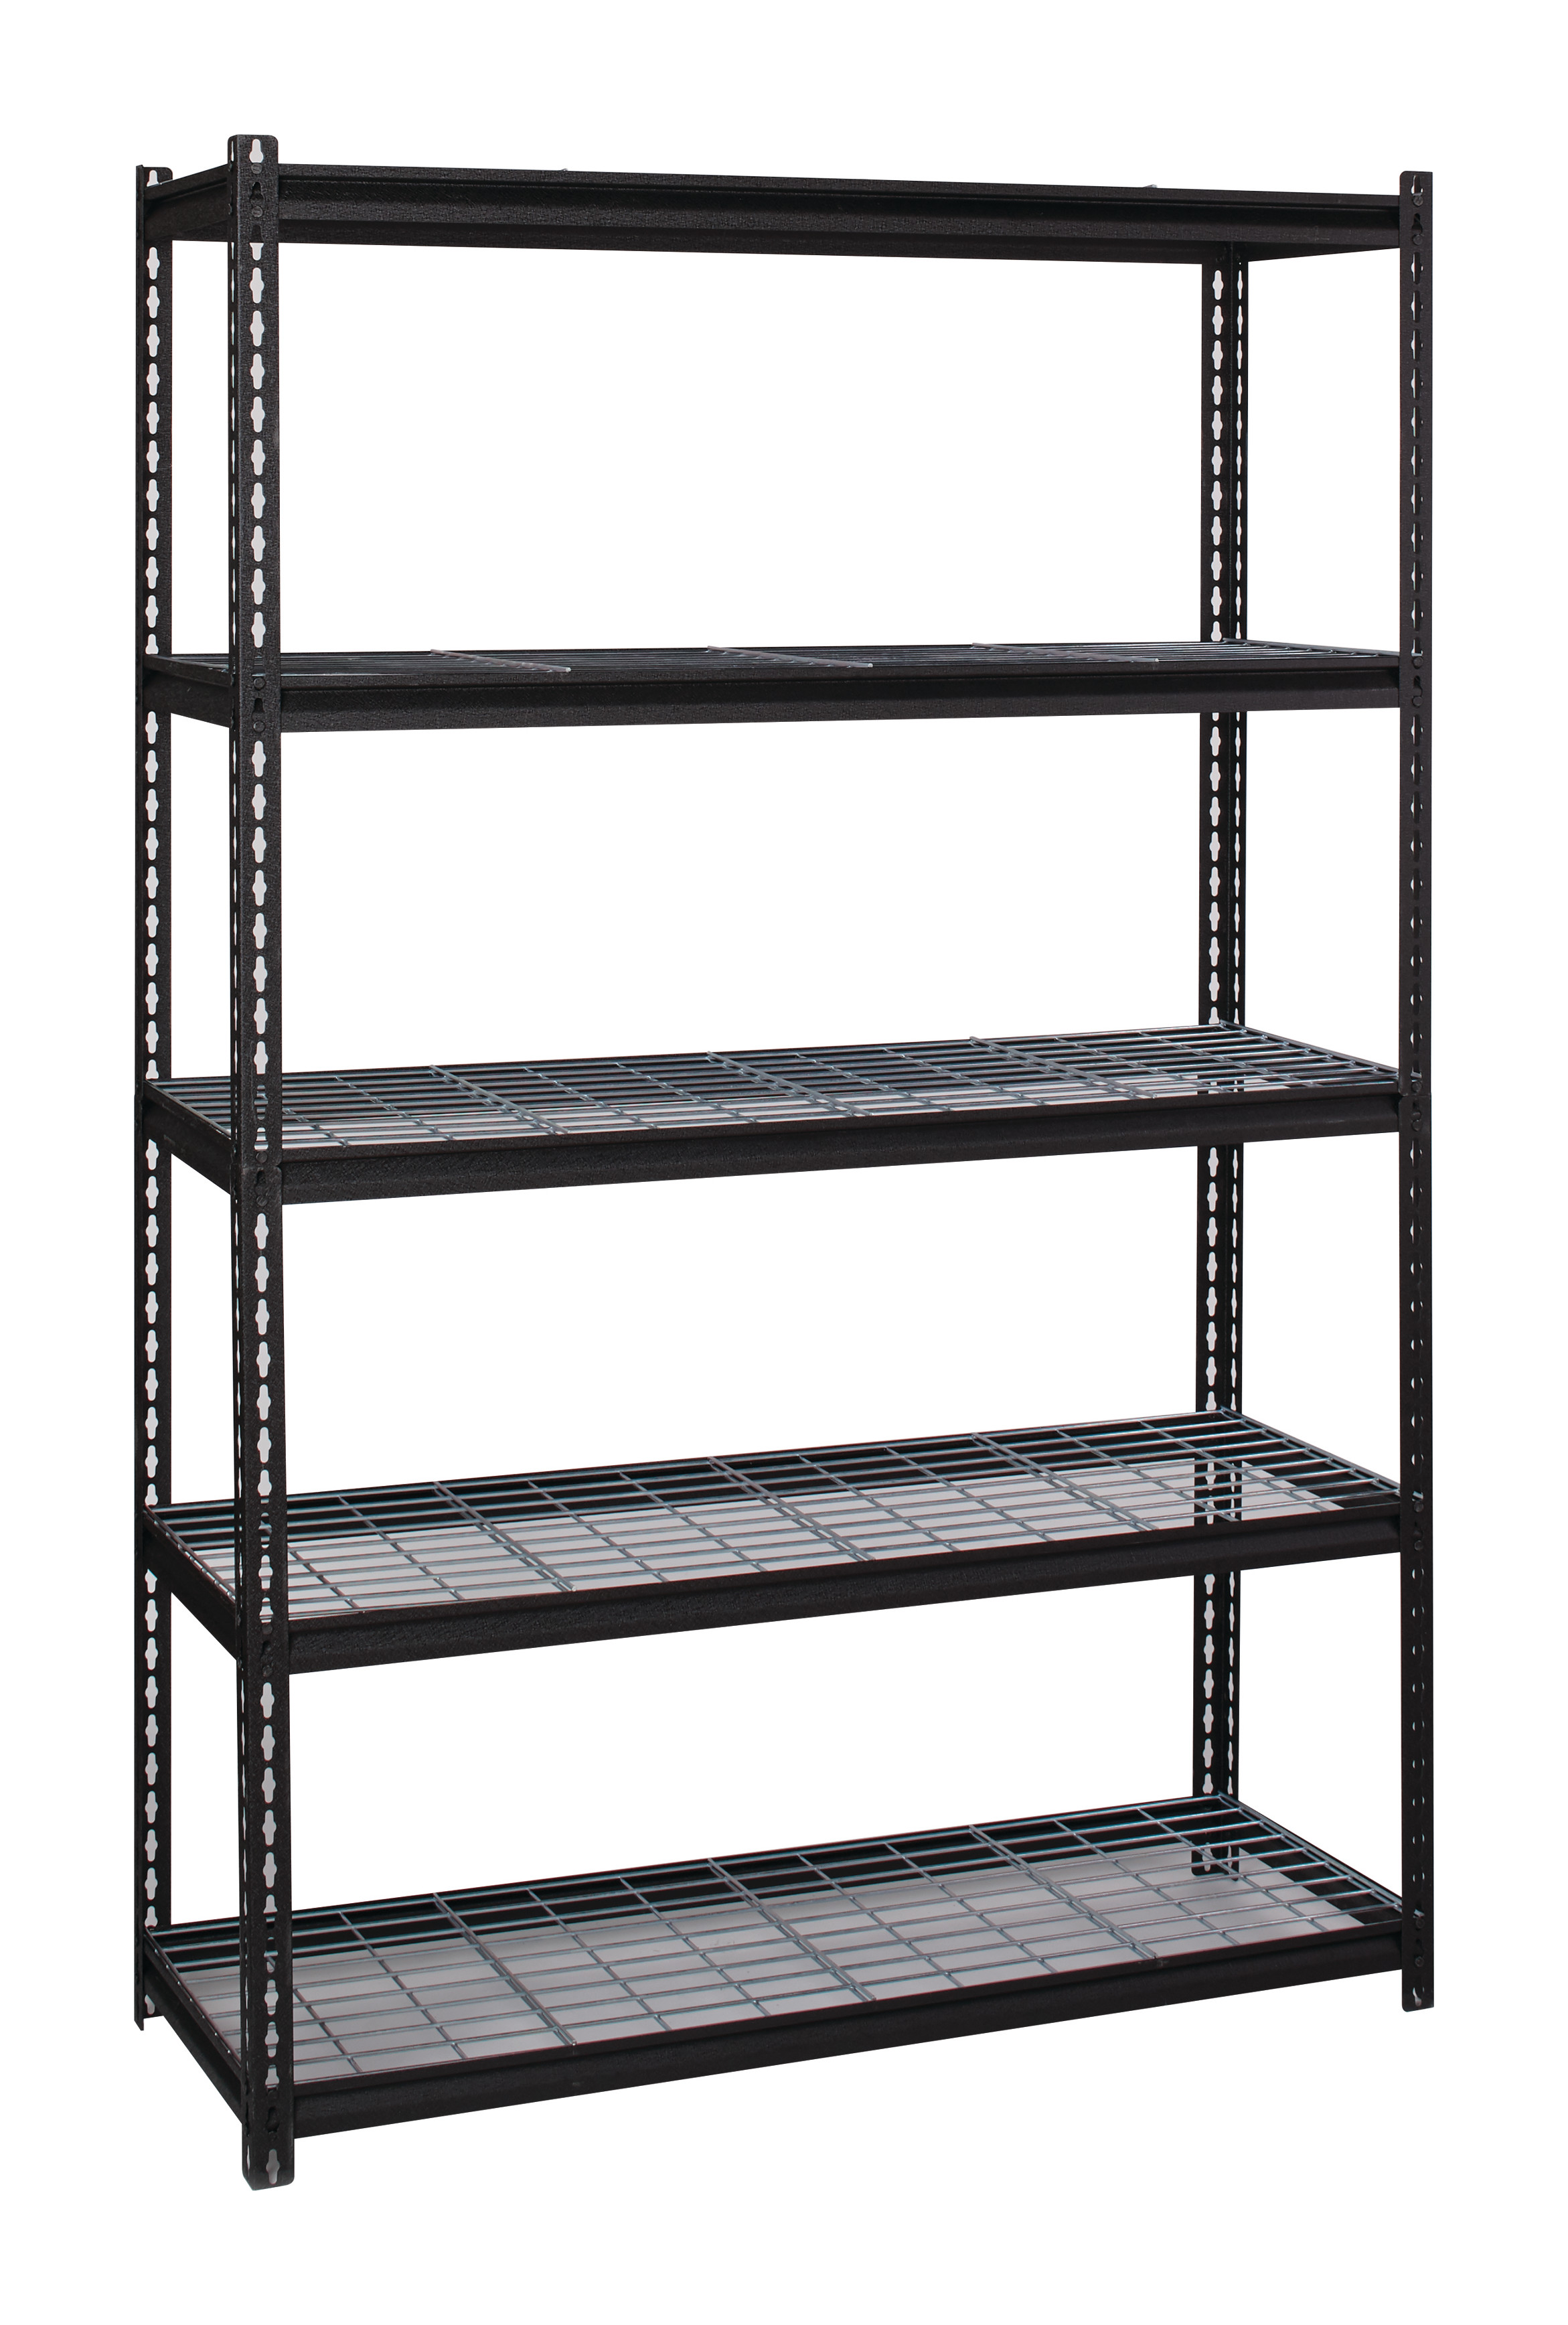 Iron Horse 2300 Riveted Wire Deck Shelving, 5-Shelf, 18Dx48Wx72H, Black - image 1 of 11